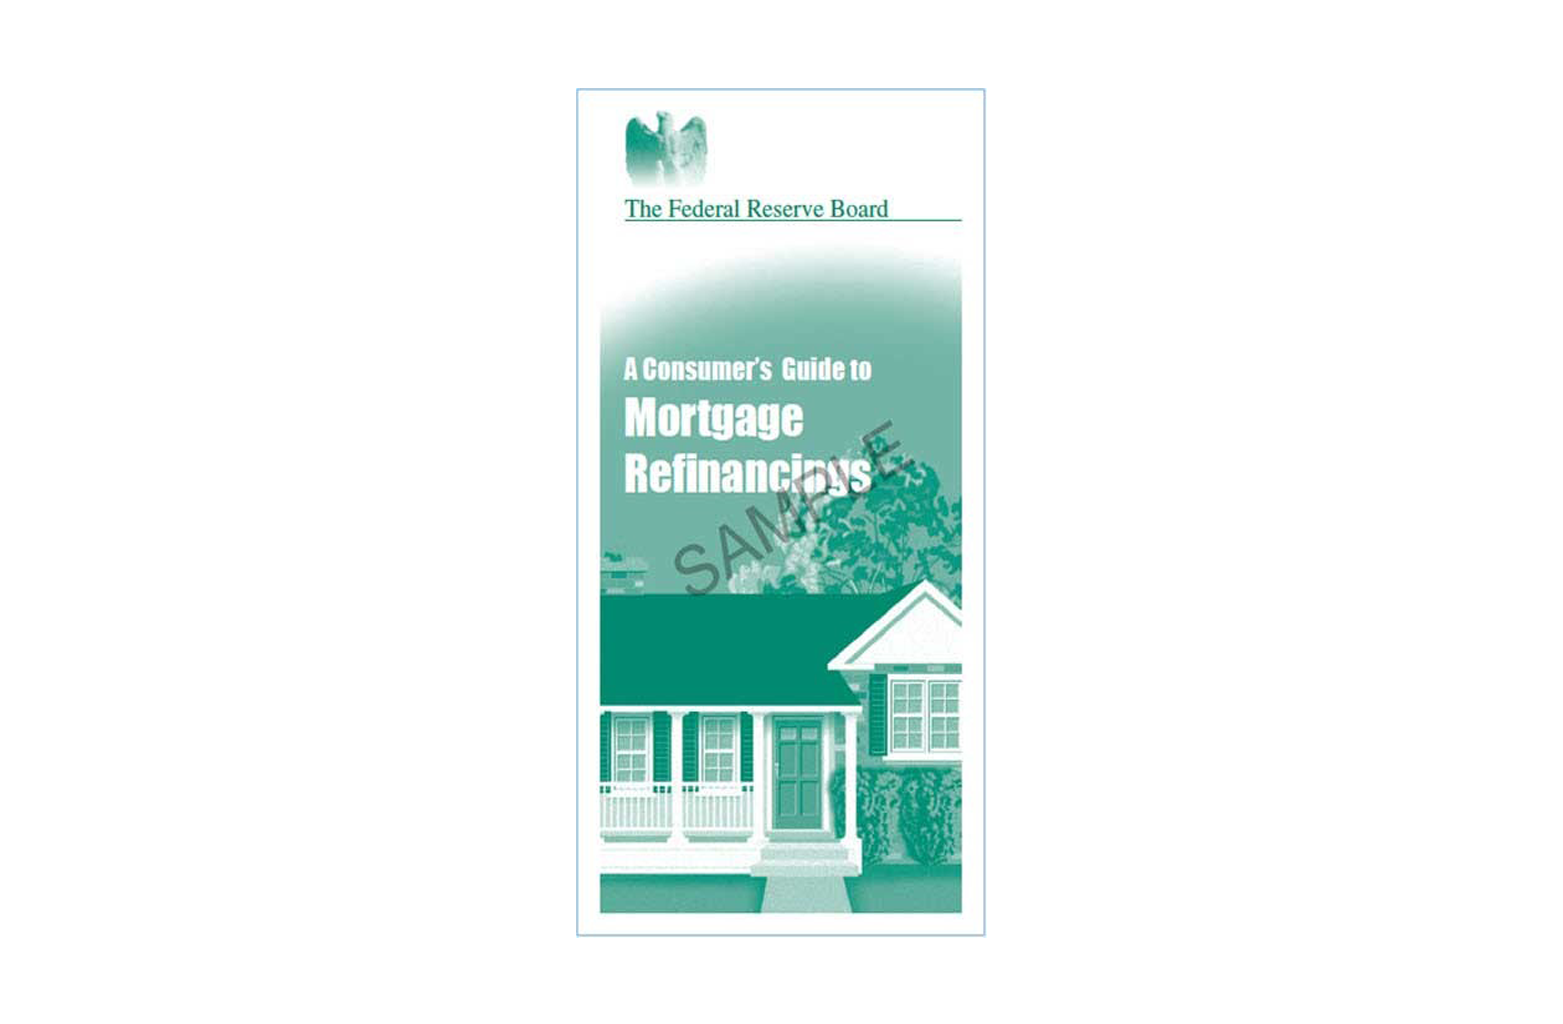 Consumers Guide to Mortgage Refinancing